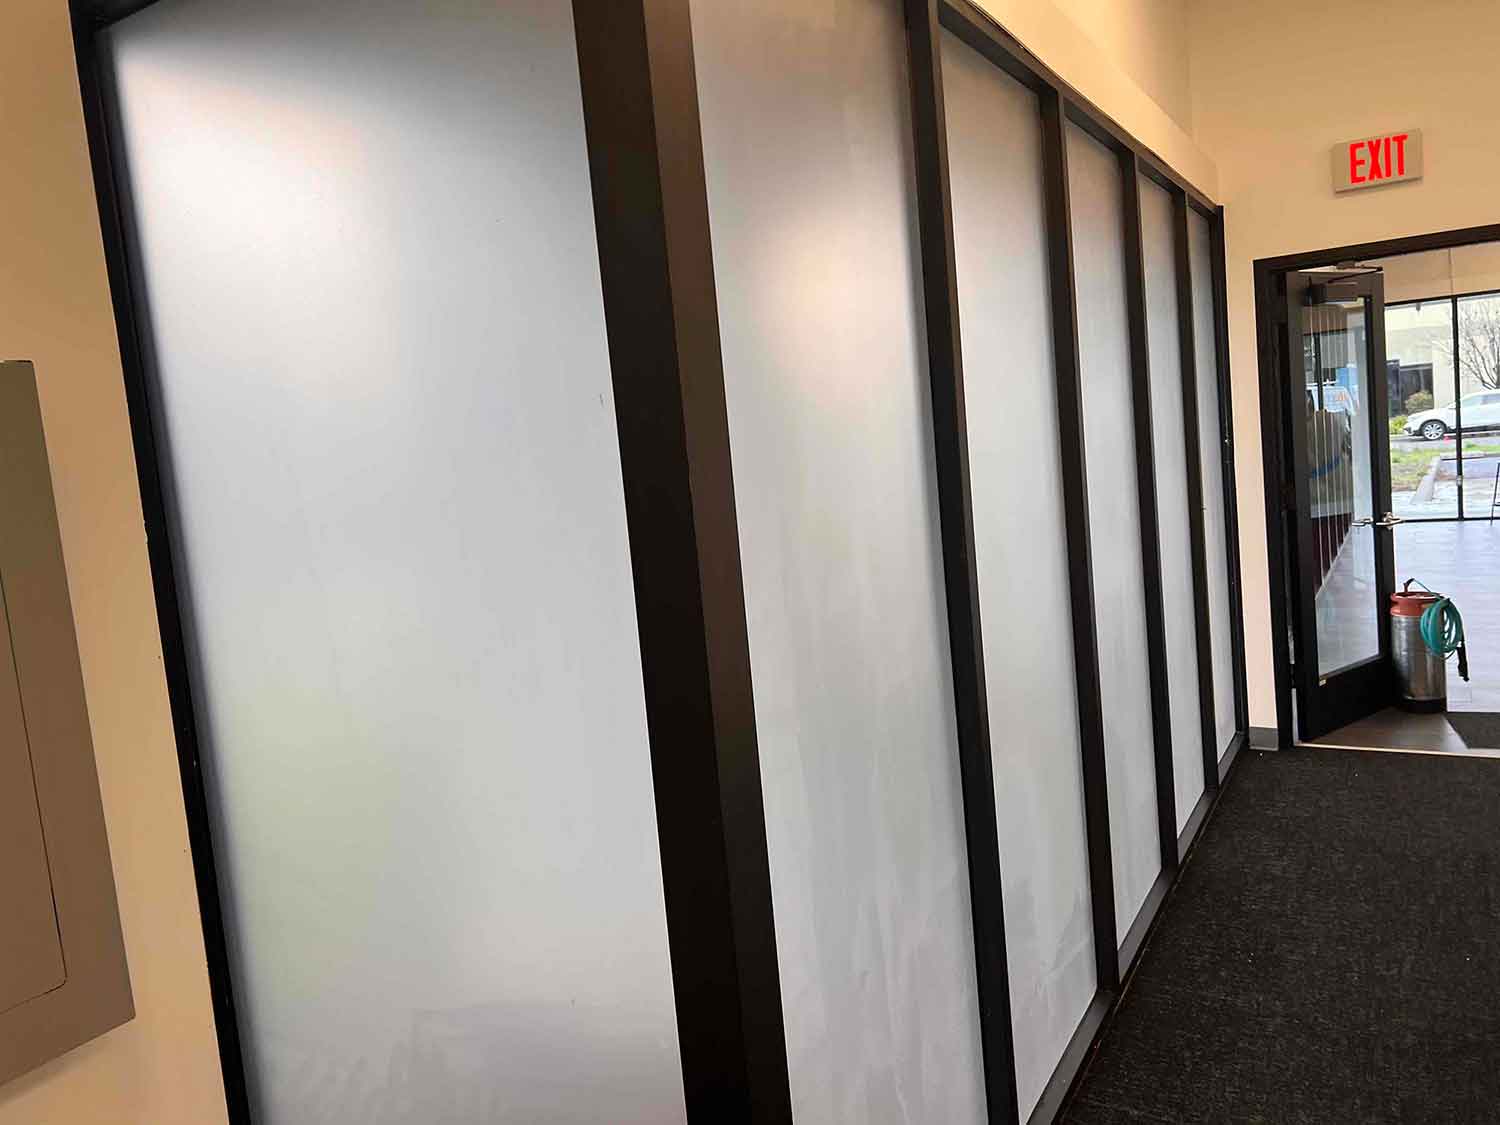 ClimatePro installed 3M Privacy Window Tint in this Santa Rosa, CA office.